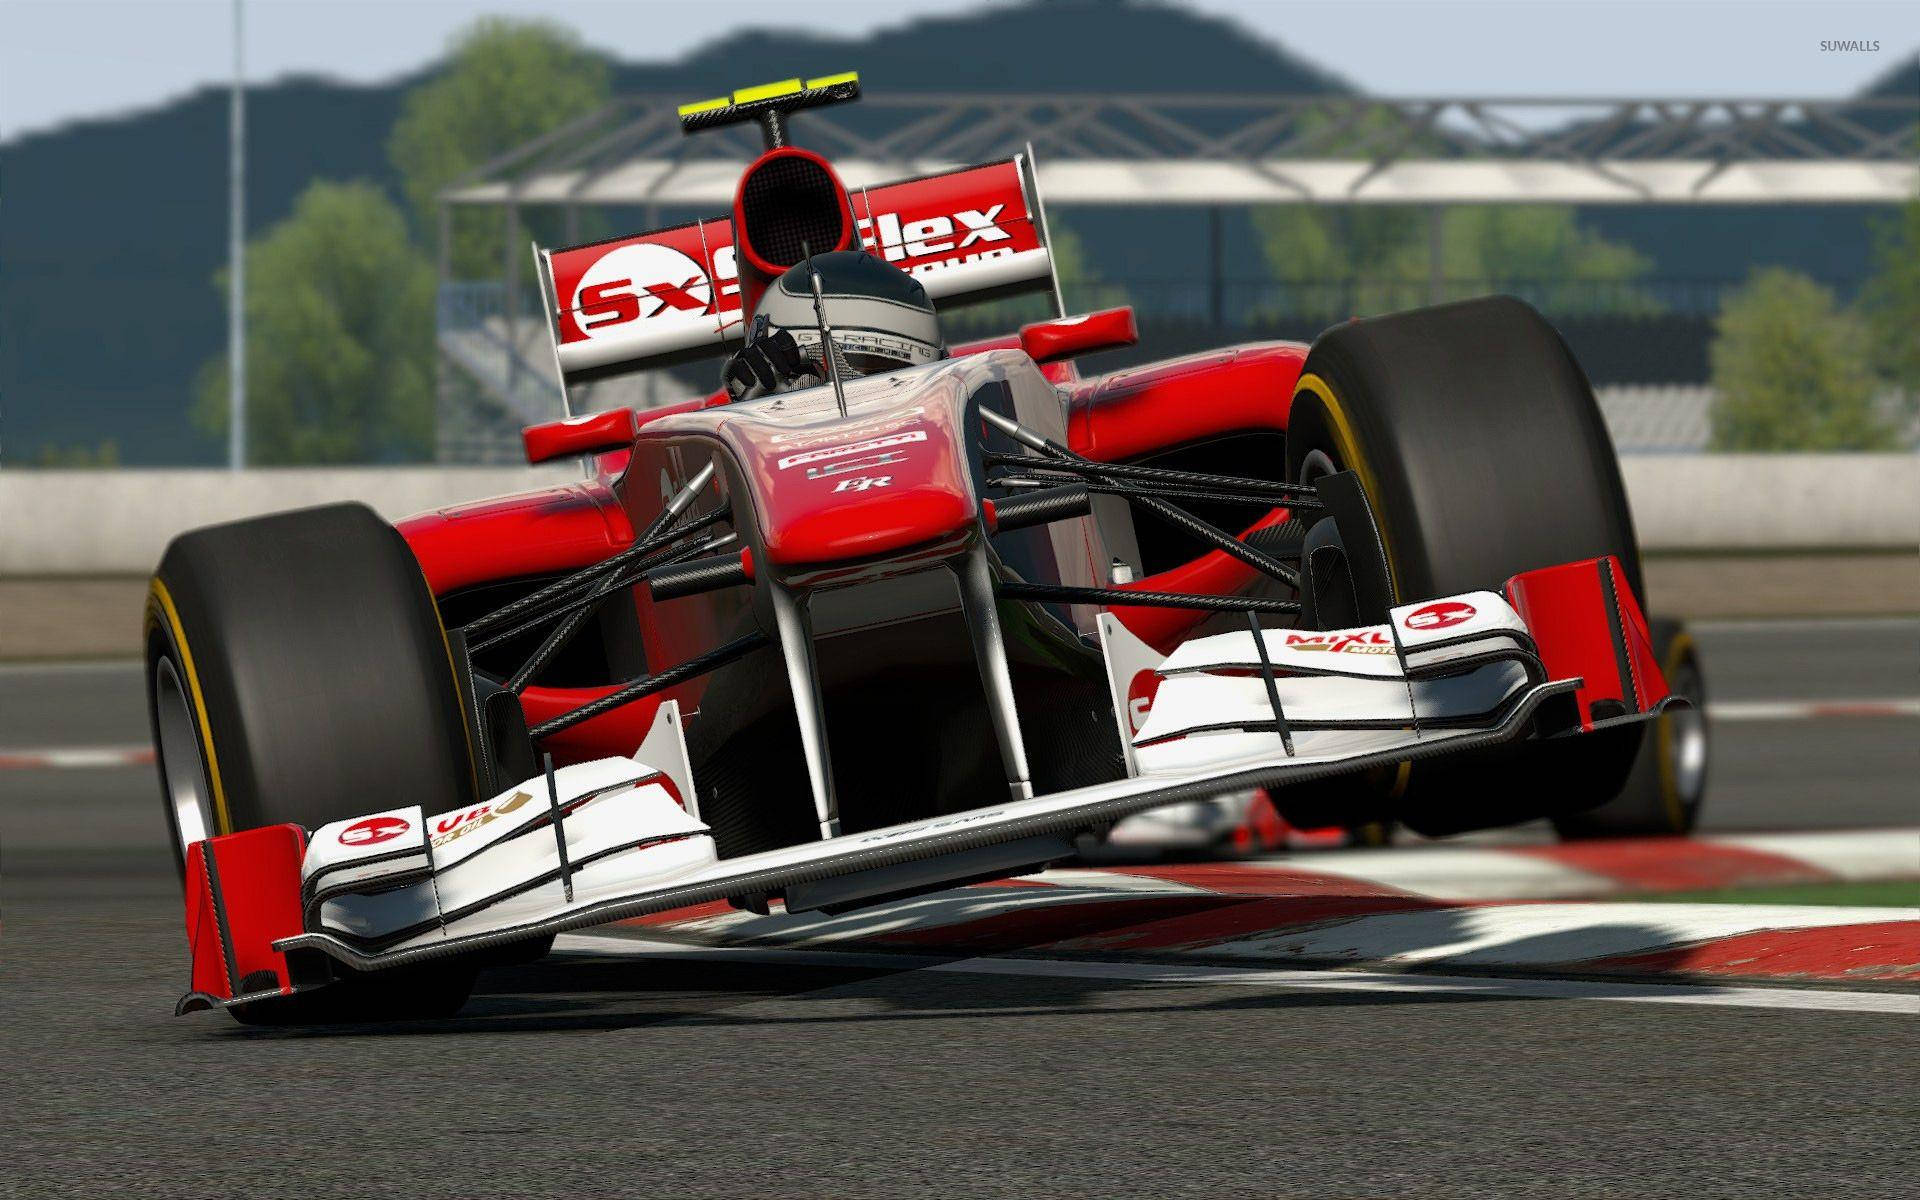 Monaco F2 From Project Cars Wallpaper